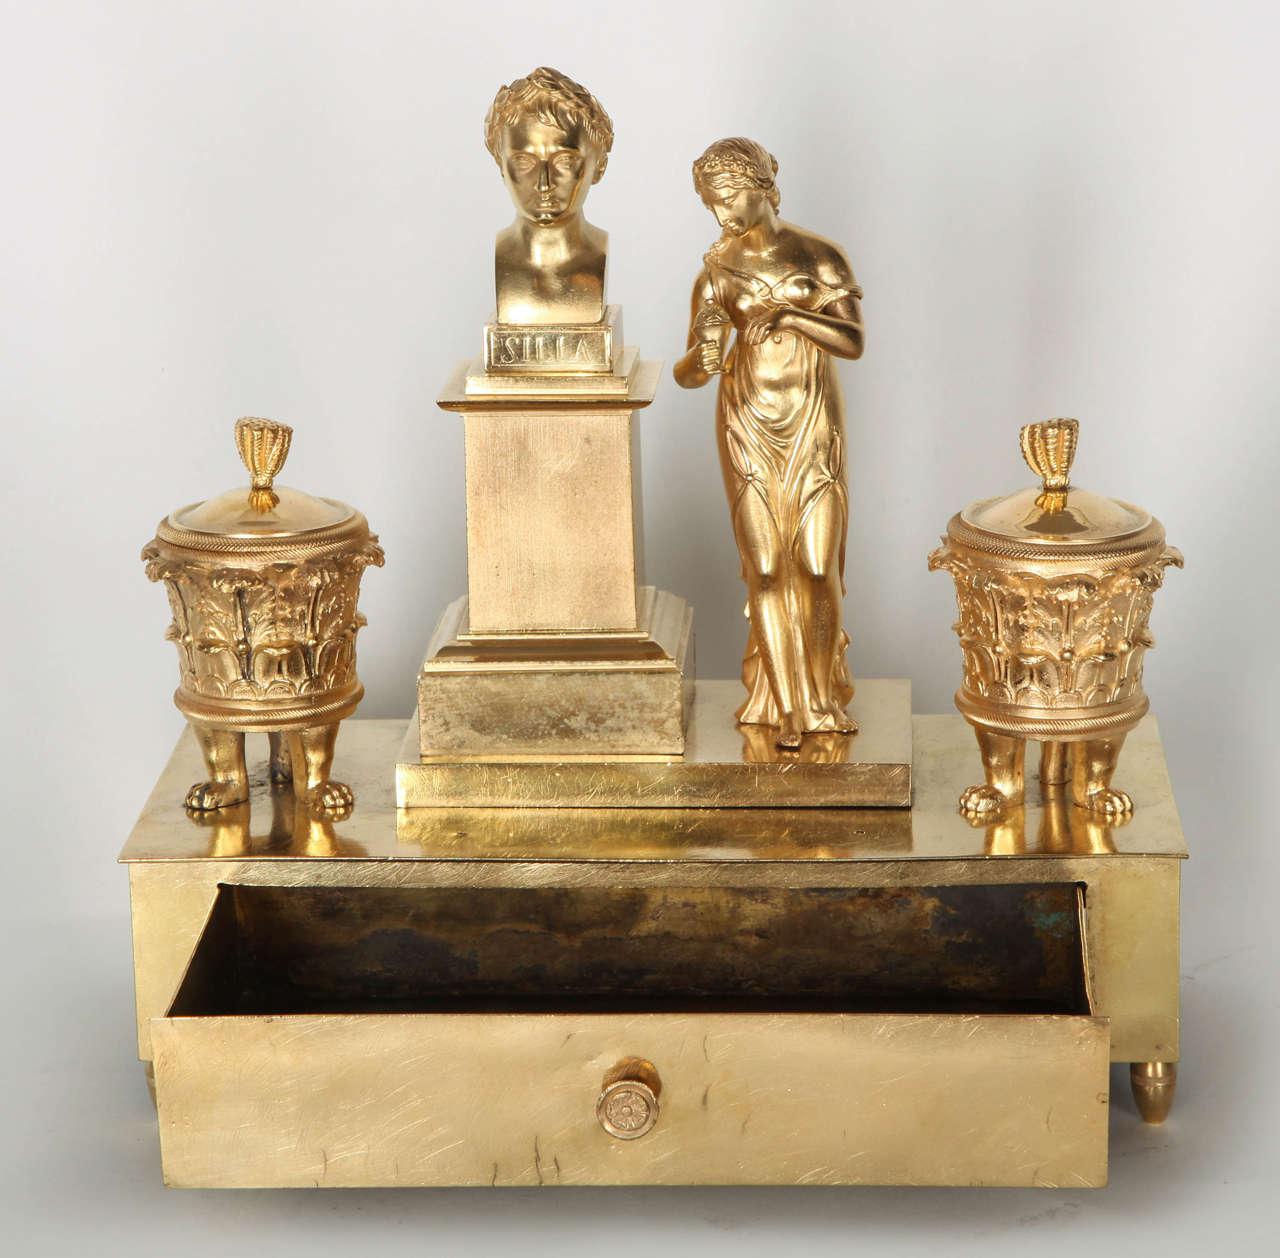 Napoleon III Small Gilded Bronze Inkwell with the Bust of Silla, France, Late 19th Century